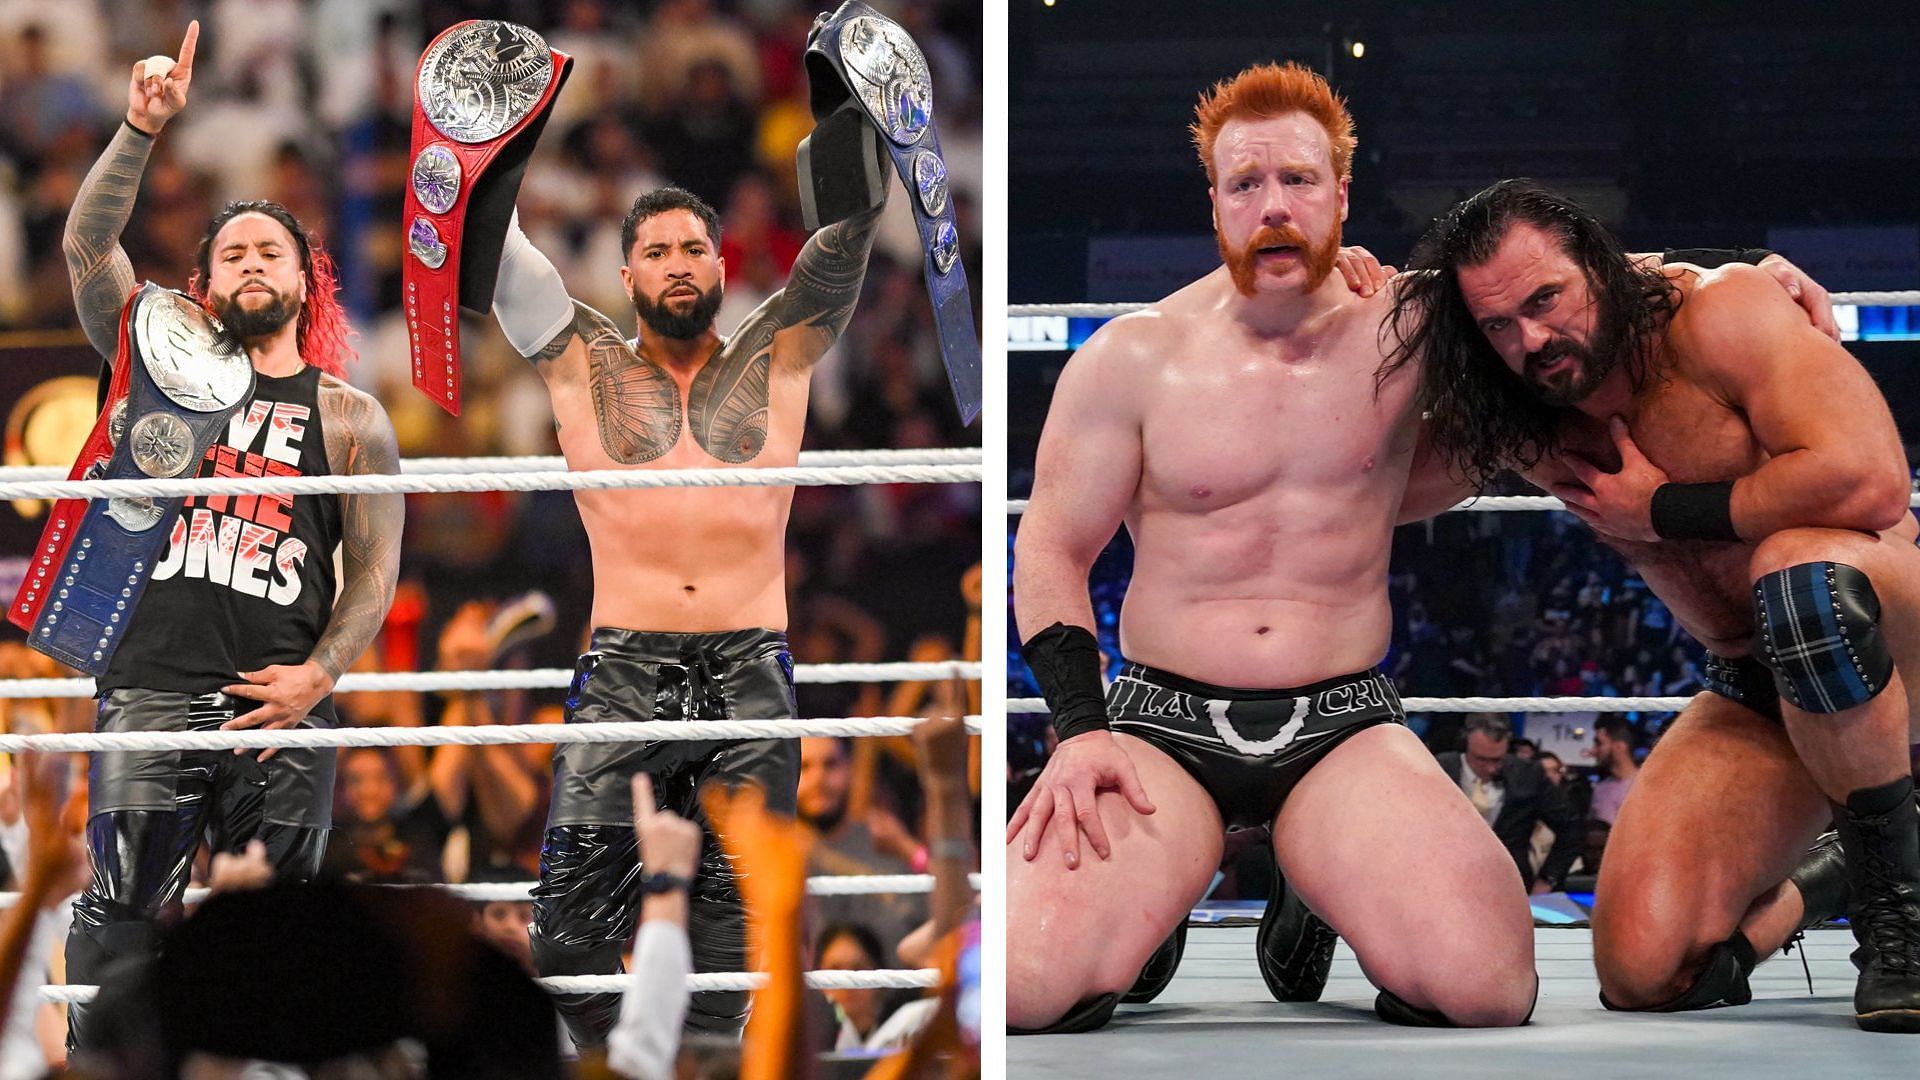 The Usos could defend the Unified WWE Tag Team Titles at the Royal Rumble